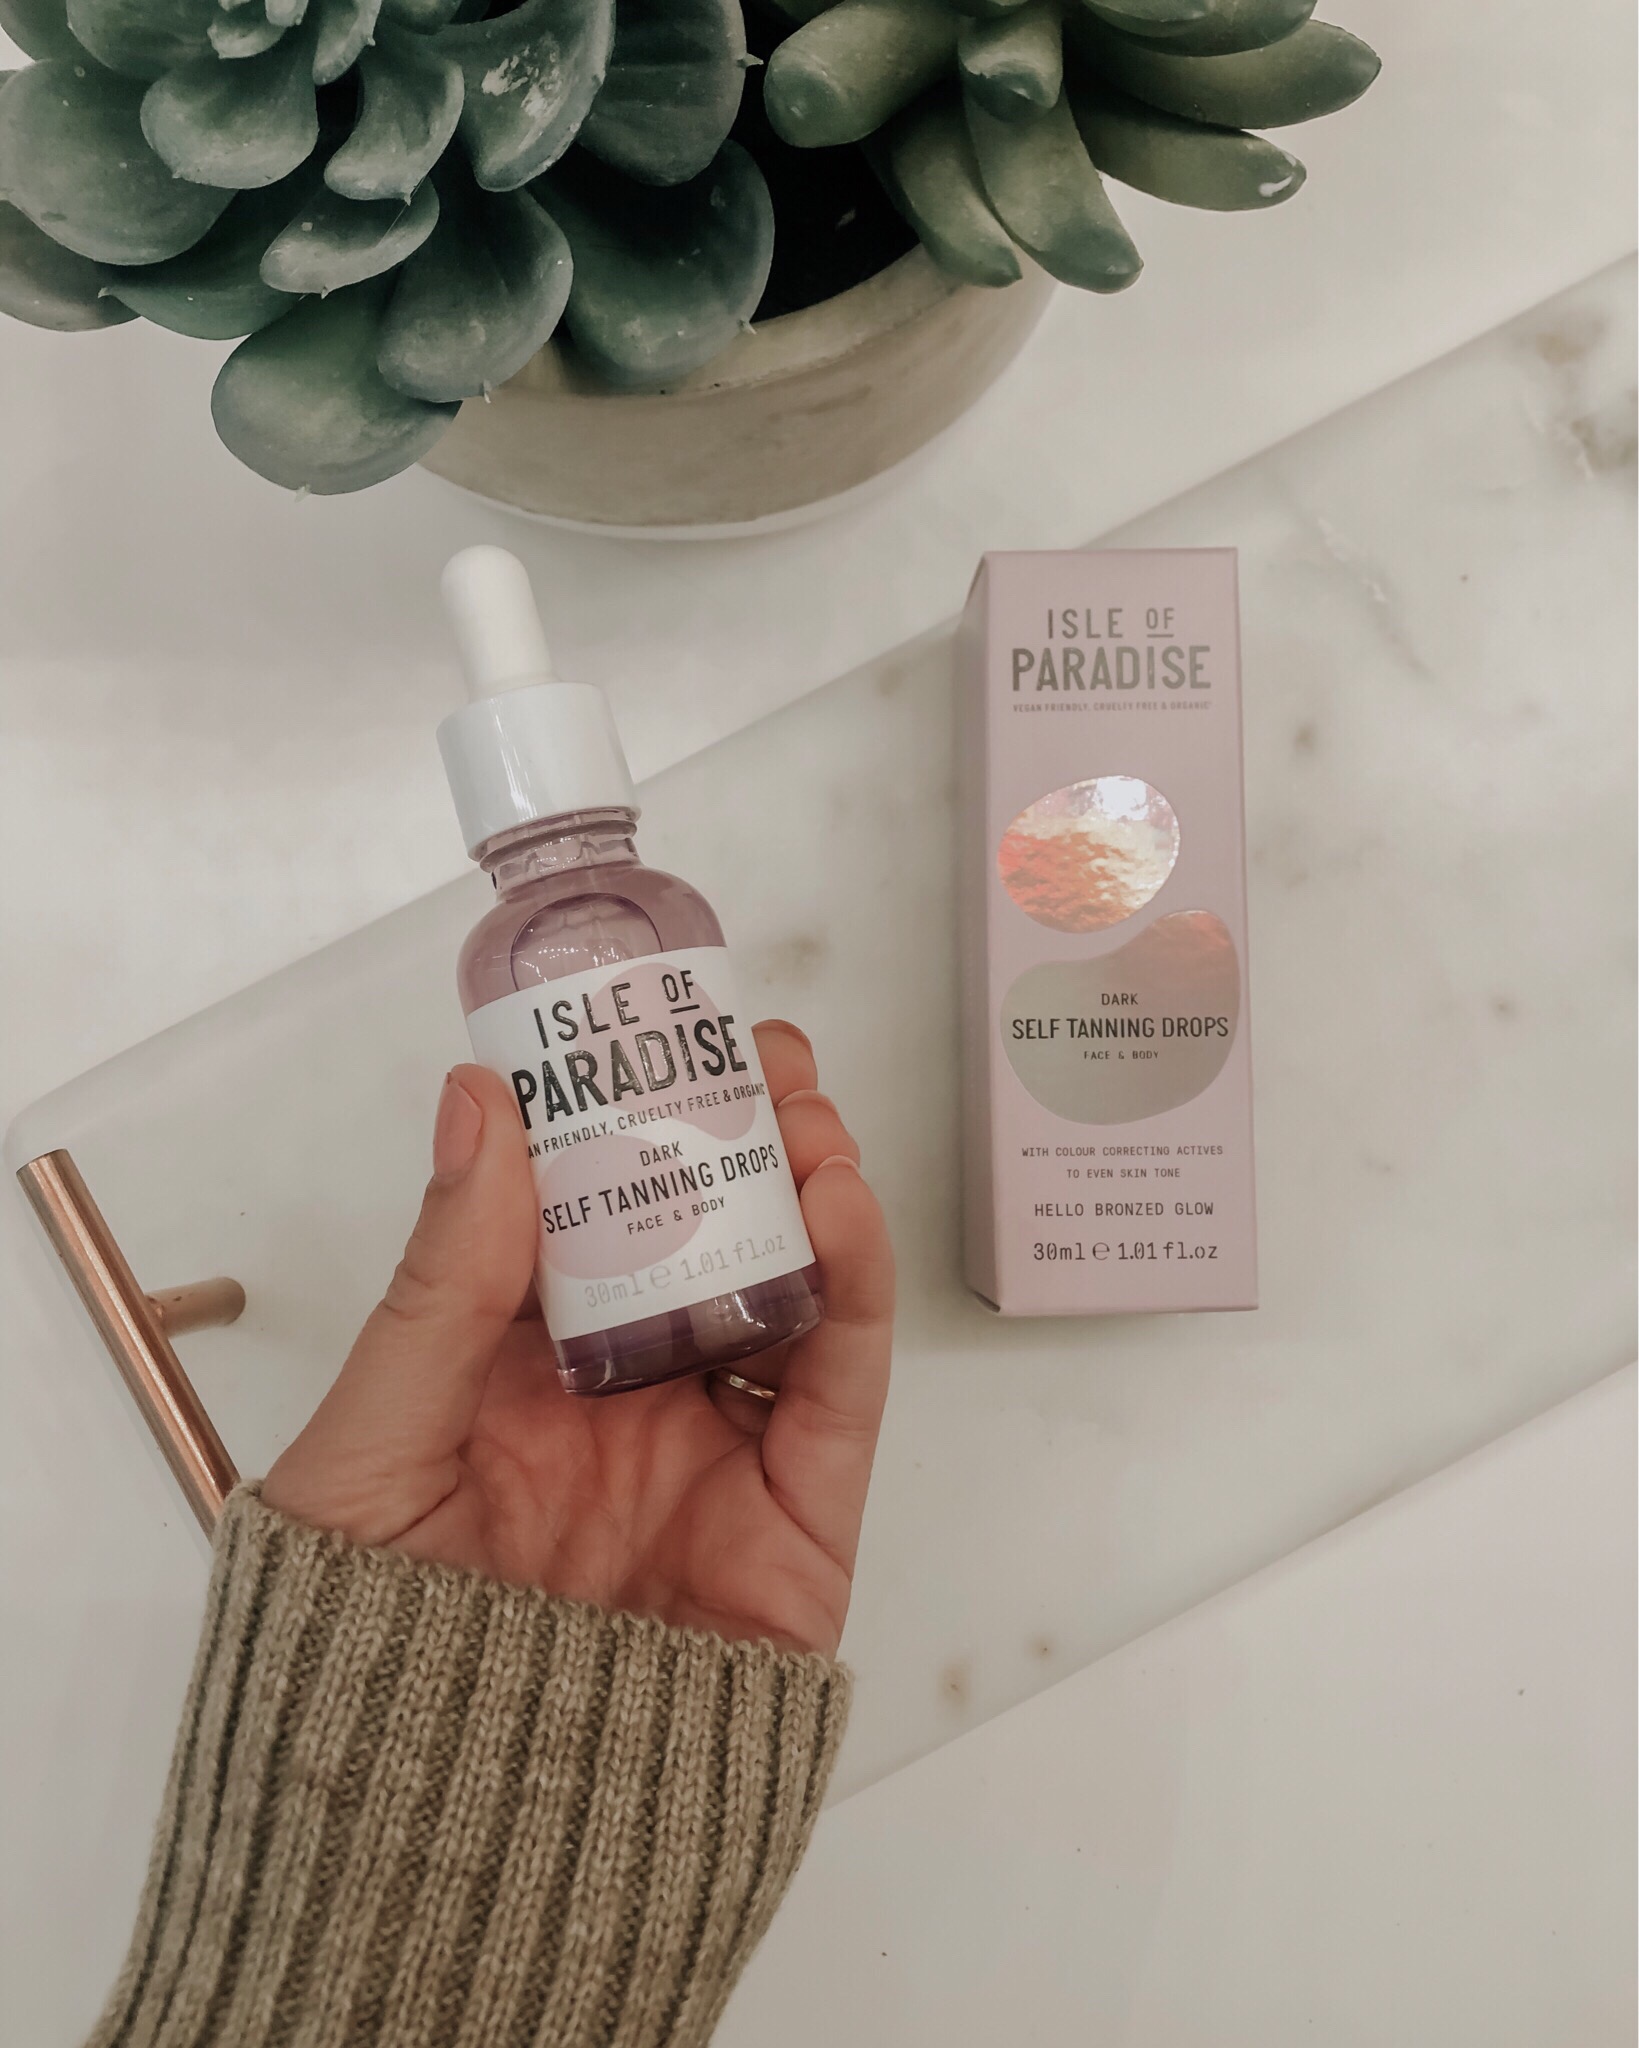 MY TOP 10 BEAUTY MUST-HAVES FROM 2019- Jaclyn De Leon Style- Sharing my holy grail beauty products that I couldn't live without this past year